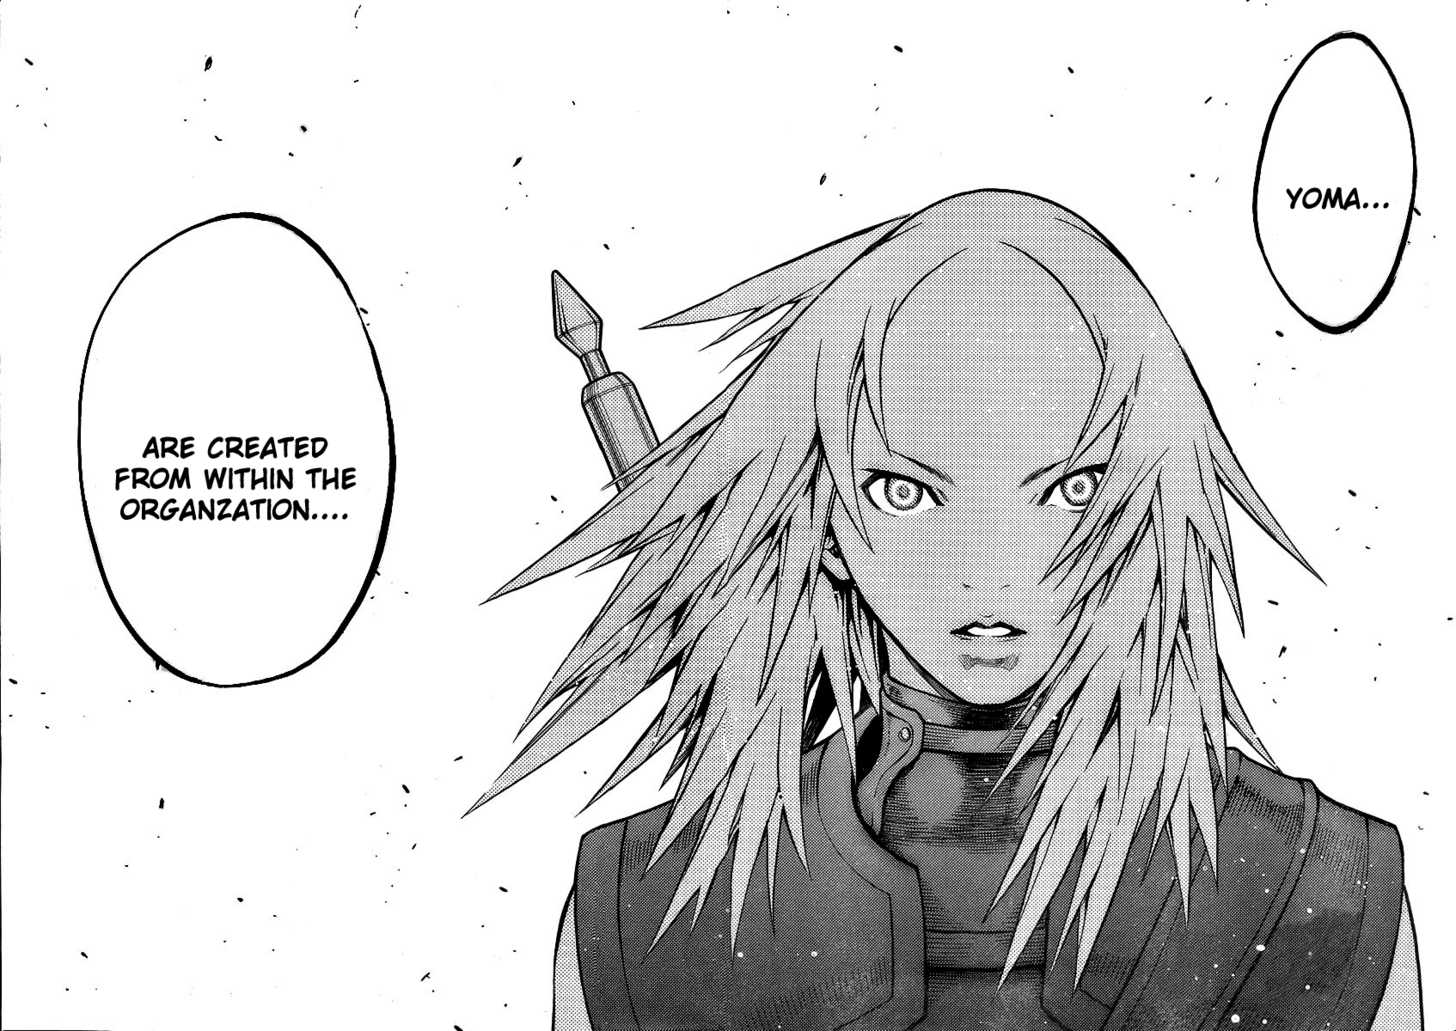 Claymore Chapter 79 Claymore Manga Online